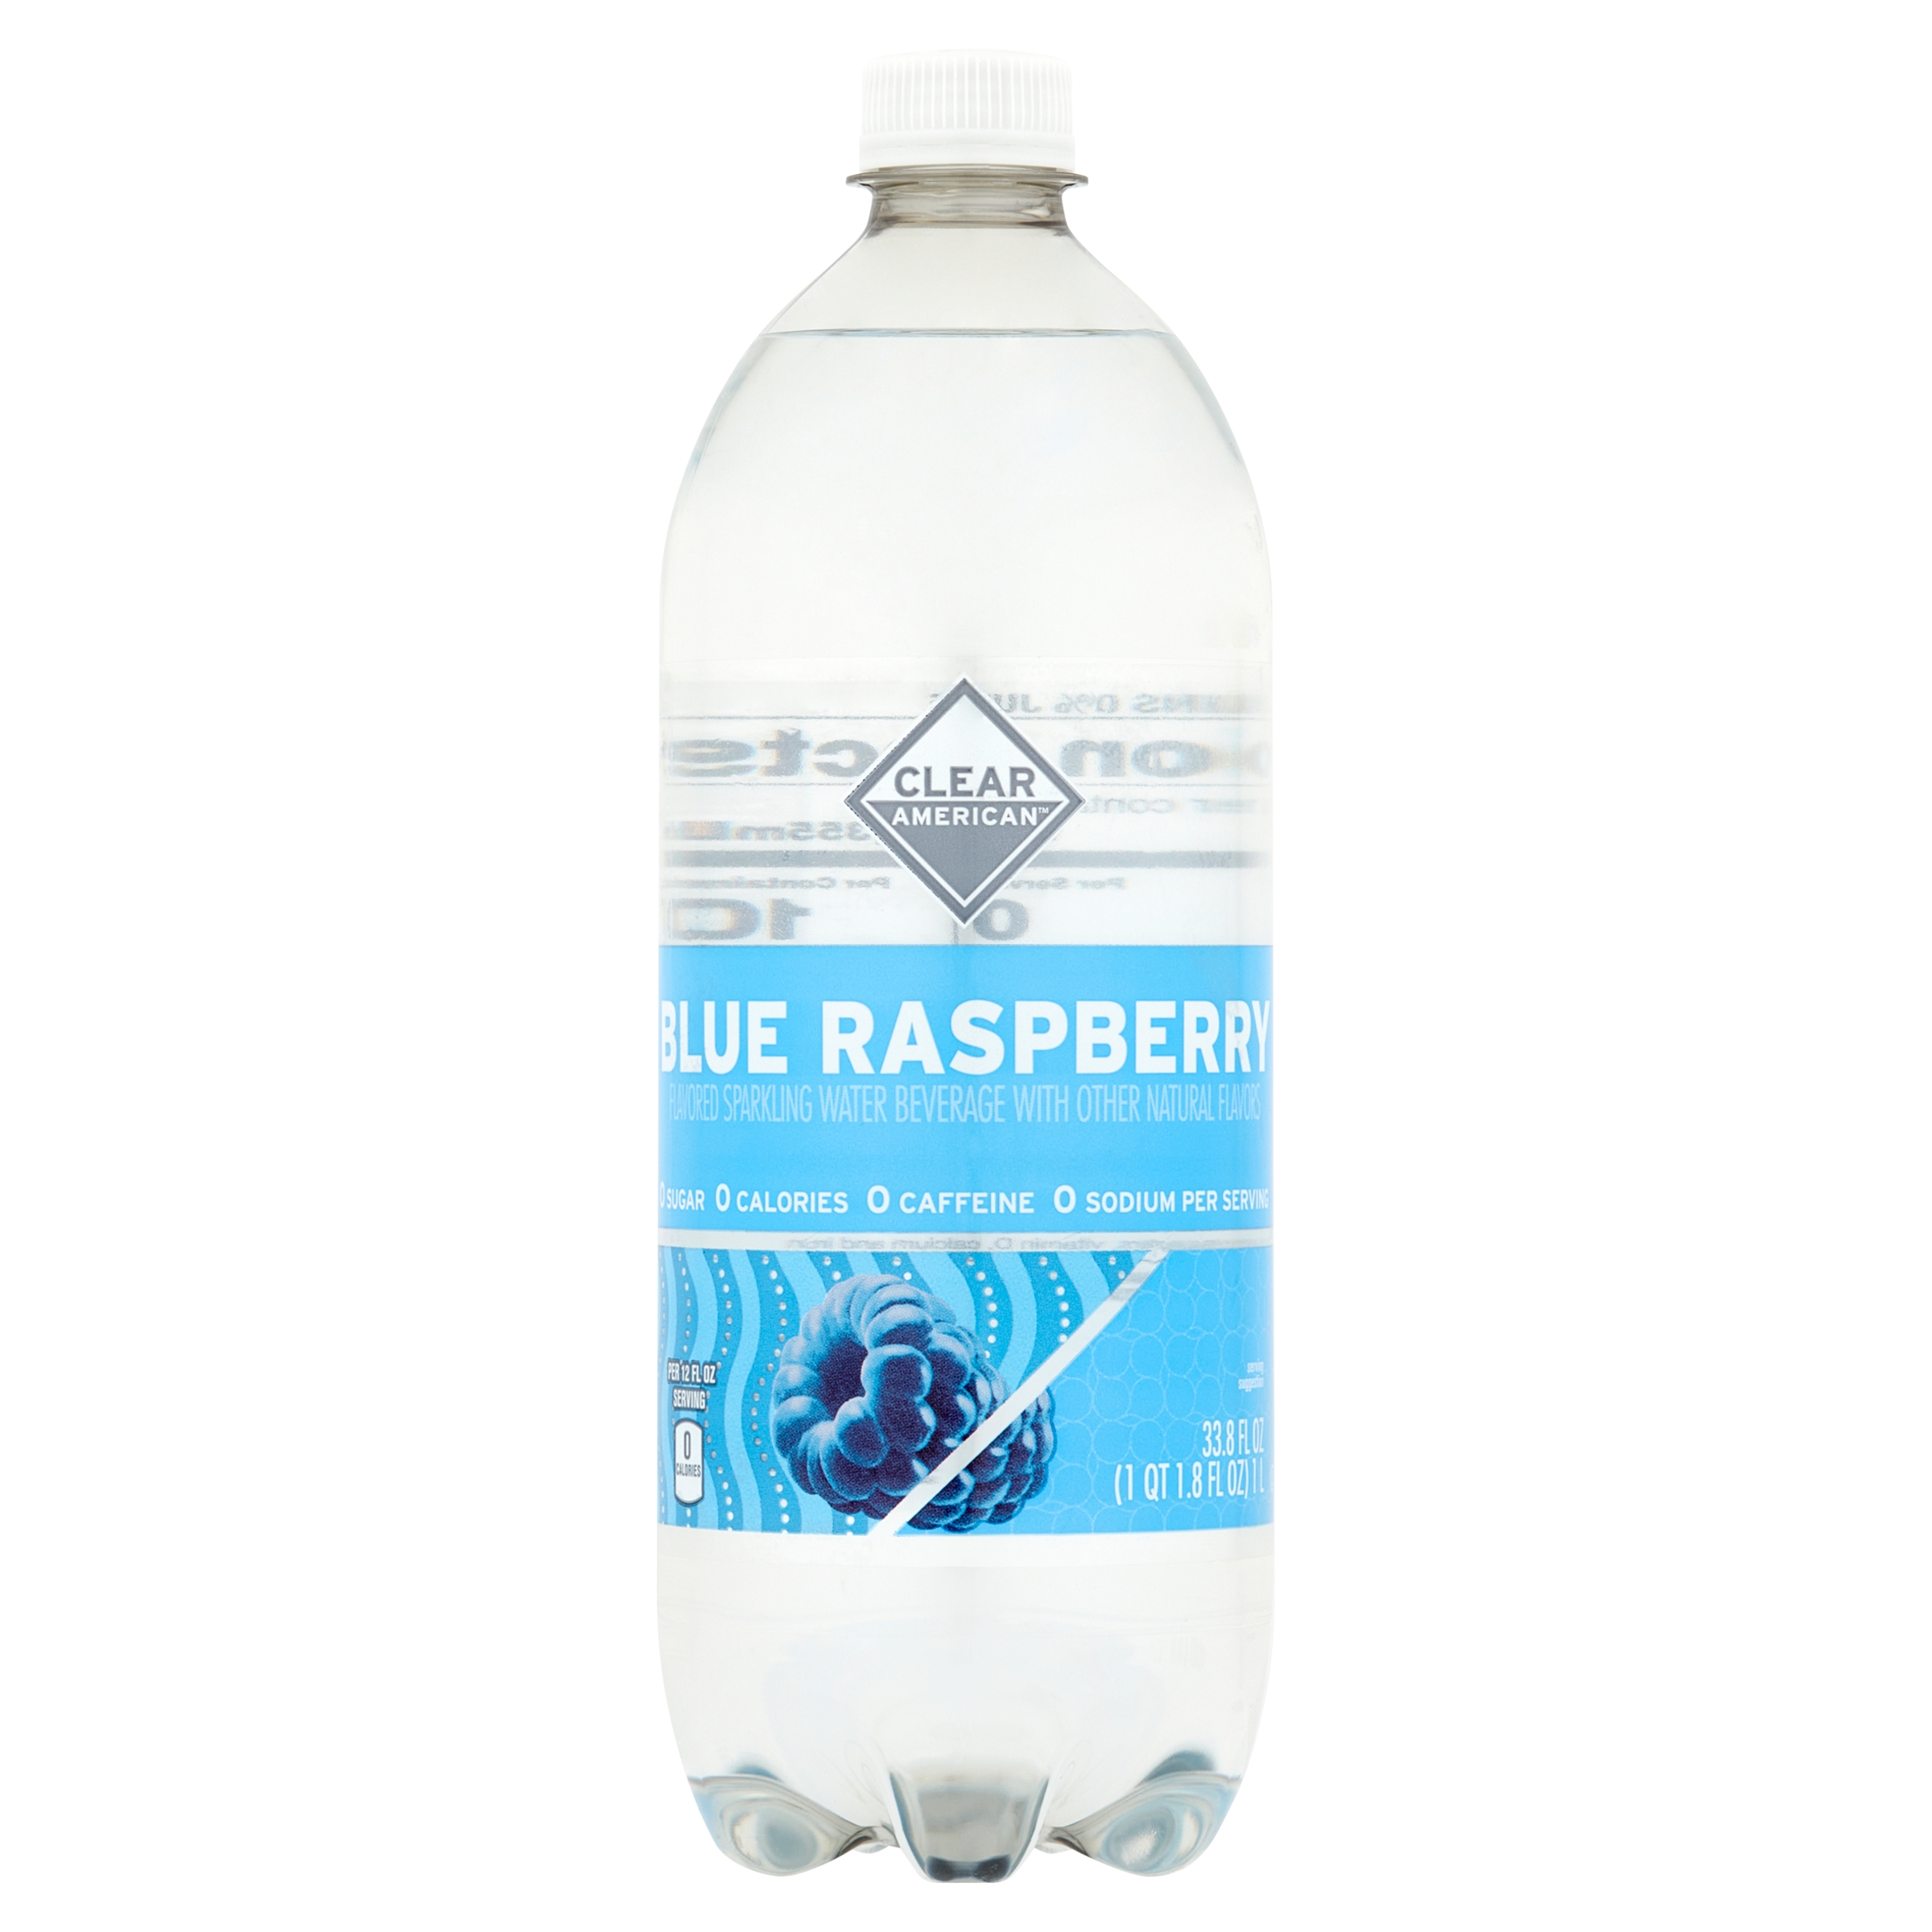 Clear American Blue Raspberry Sparkling Water, 33.8 fl oz, Bottle - image 1 of 9